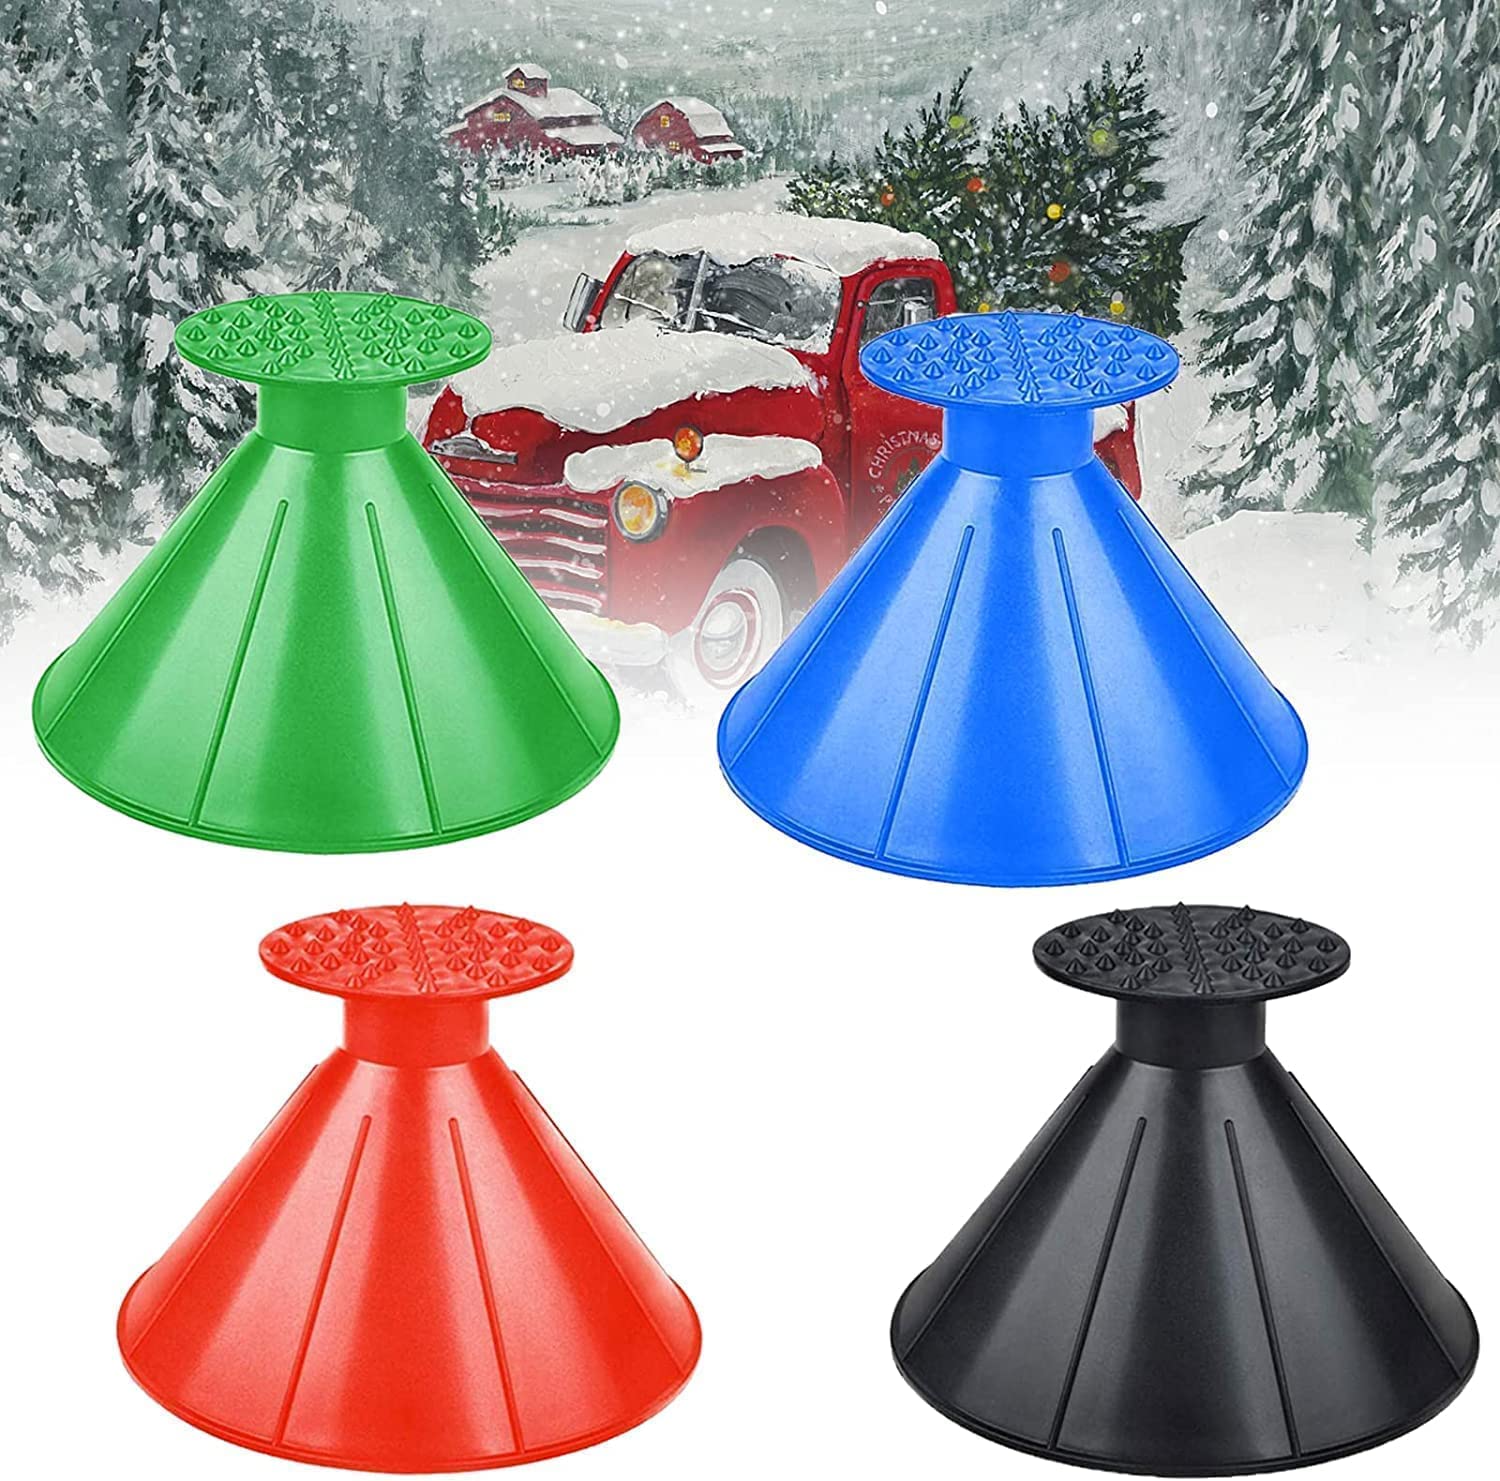 4Pack Round Ice Scrapers for Car Windshield, Snow Brush Magical Ice Scrapers  Cone Ice Scrapers Funnel Car Snow Removal Shovel 2 & 1 Tool (4 Colors) 